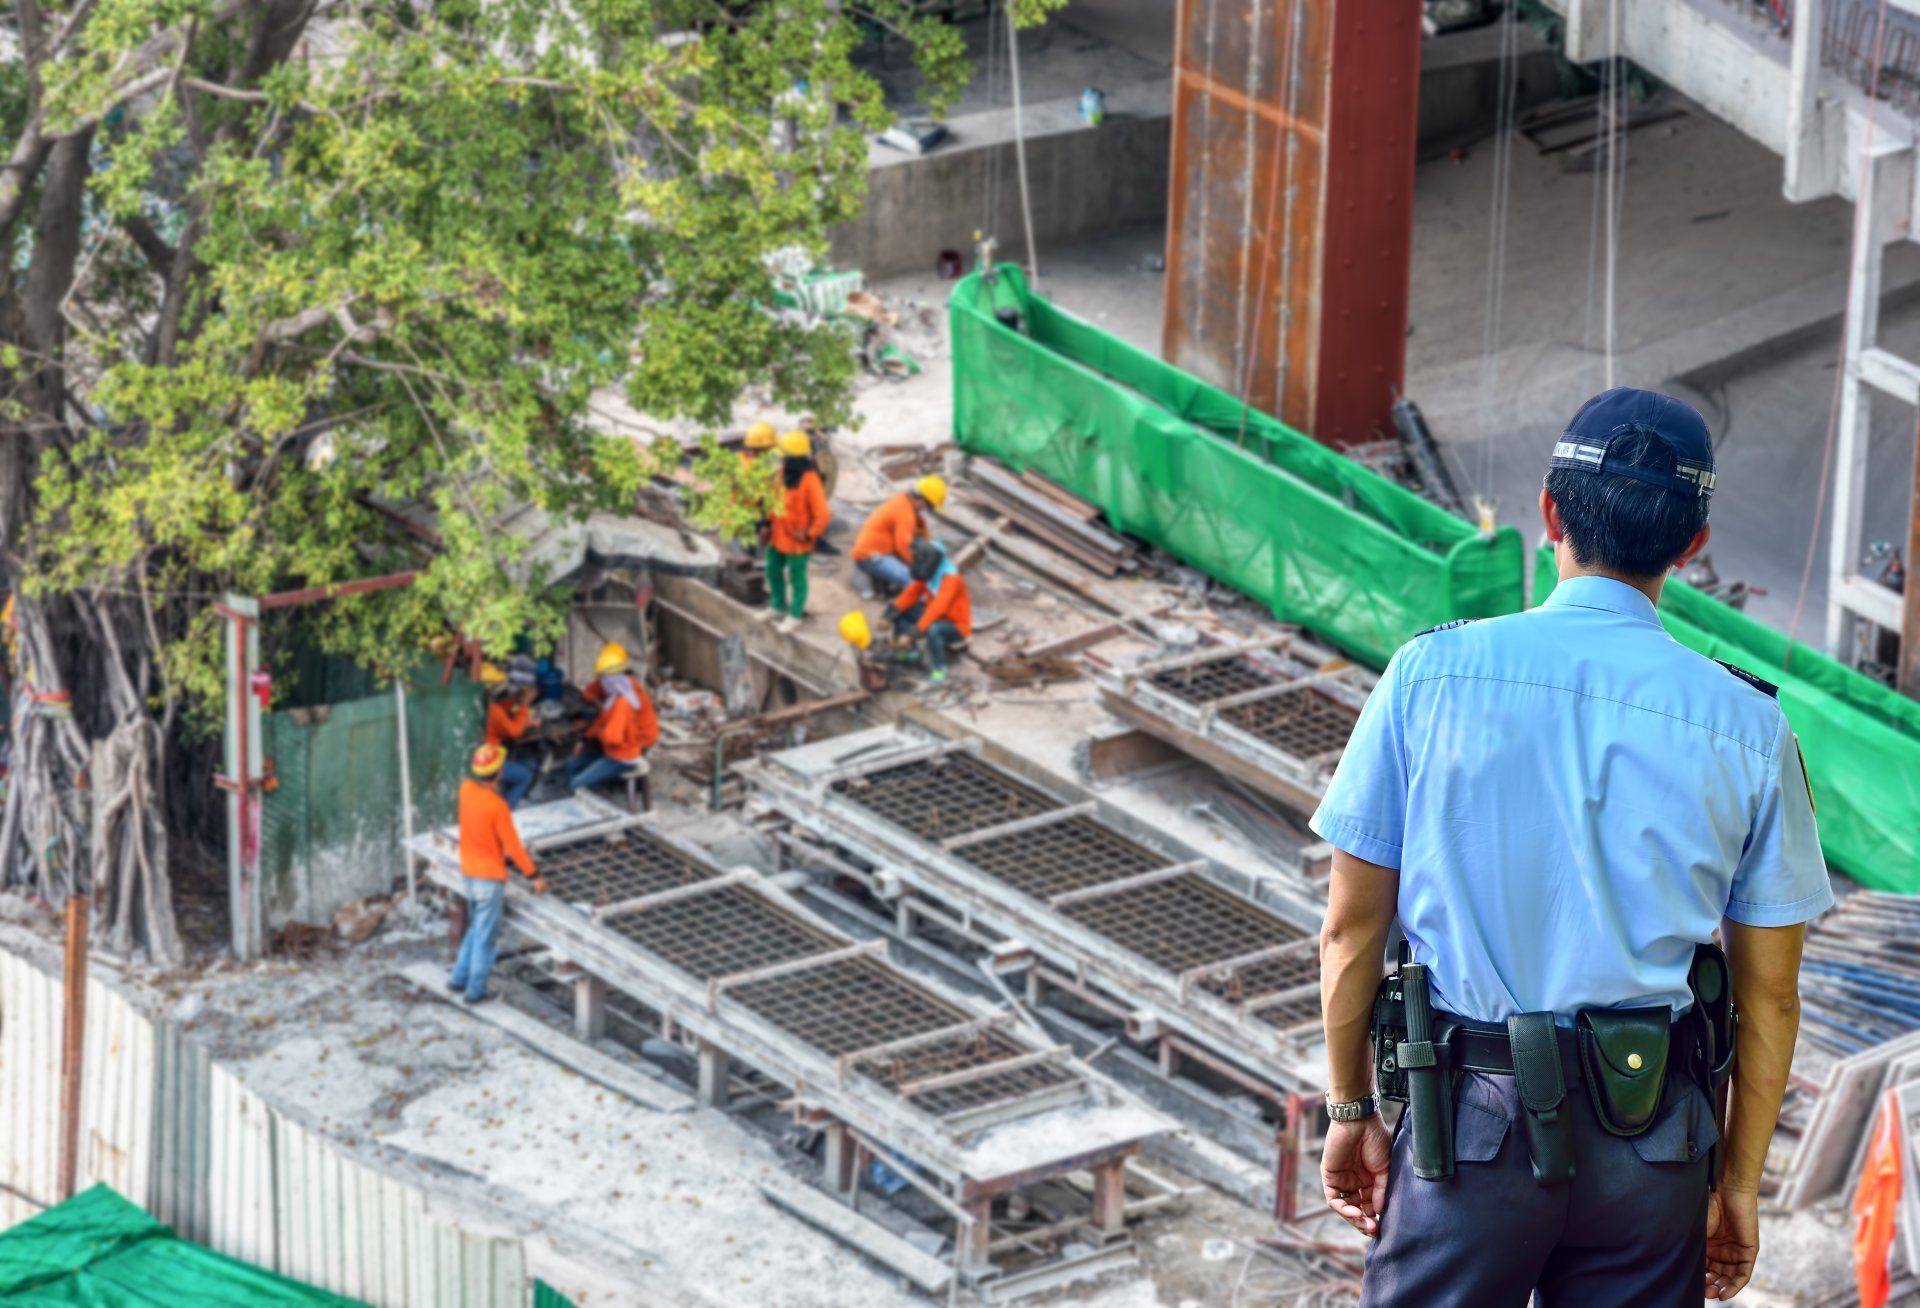 Security guard watching over a construction site